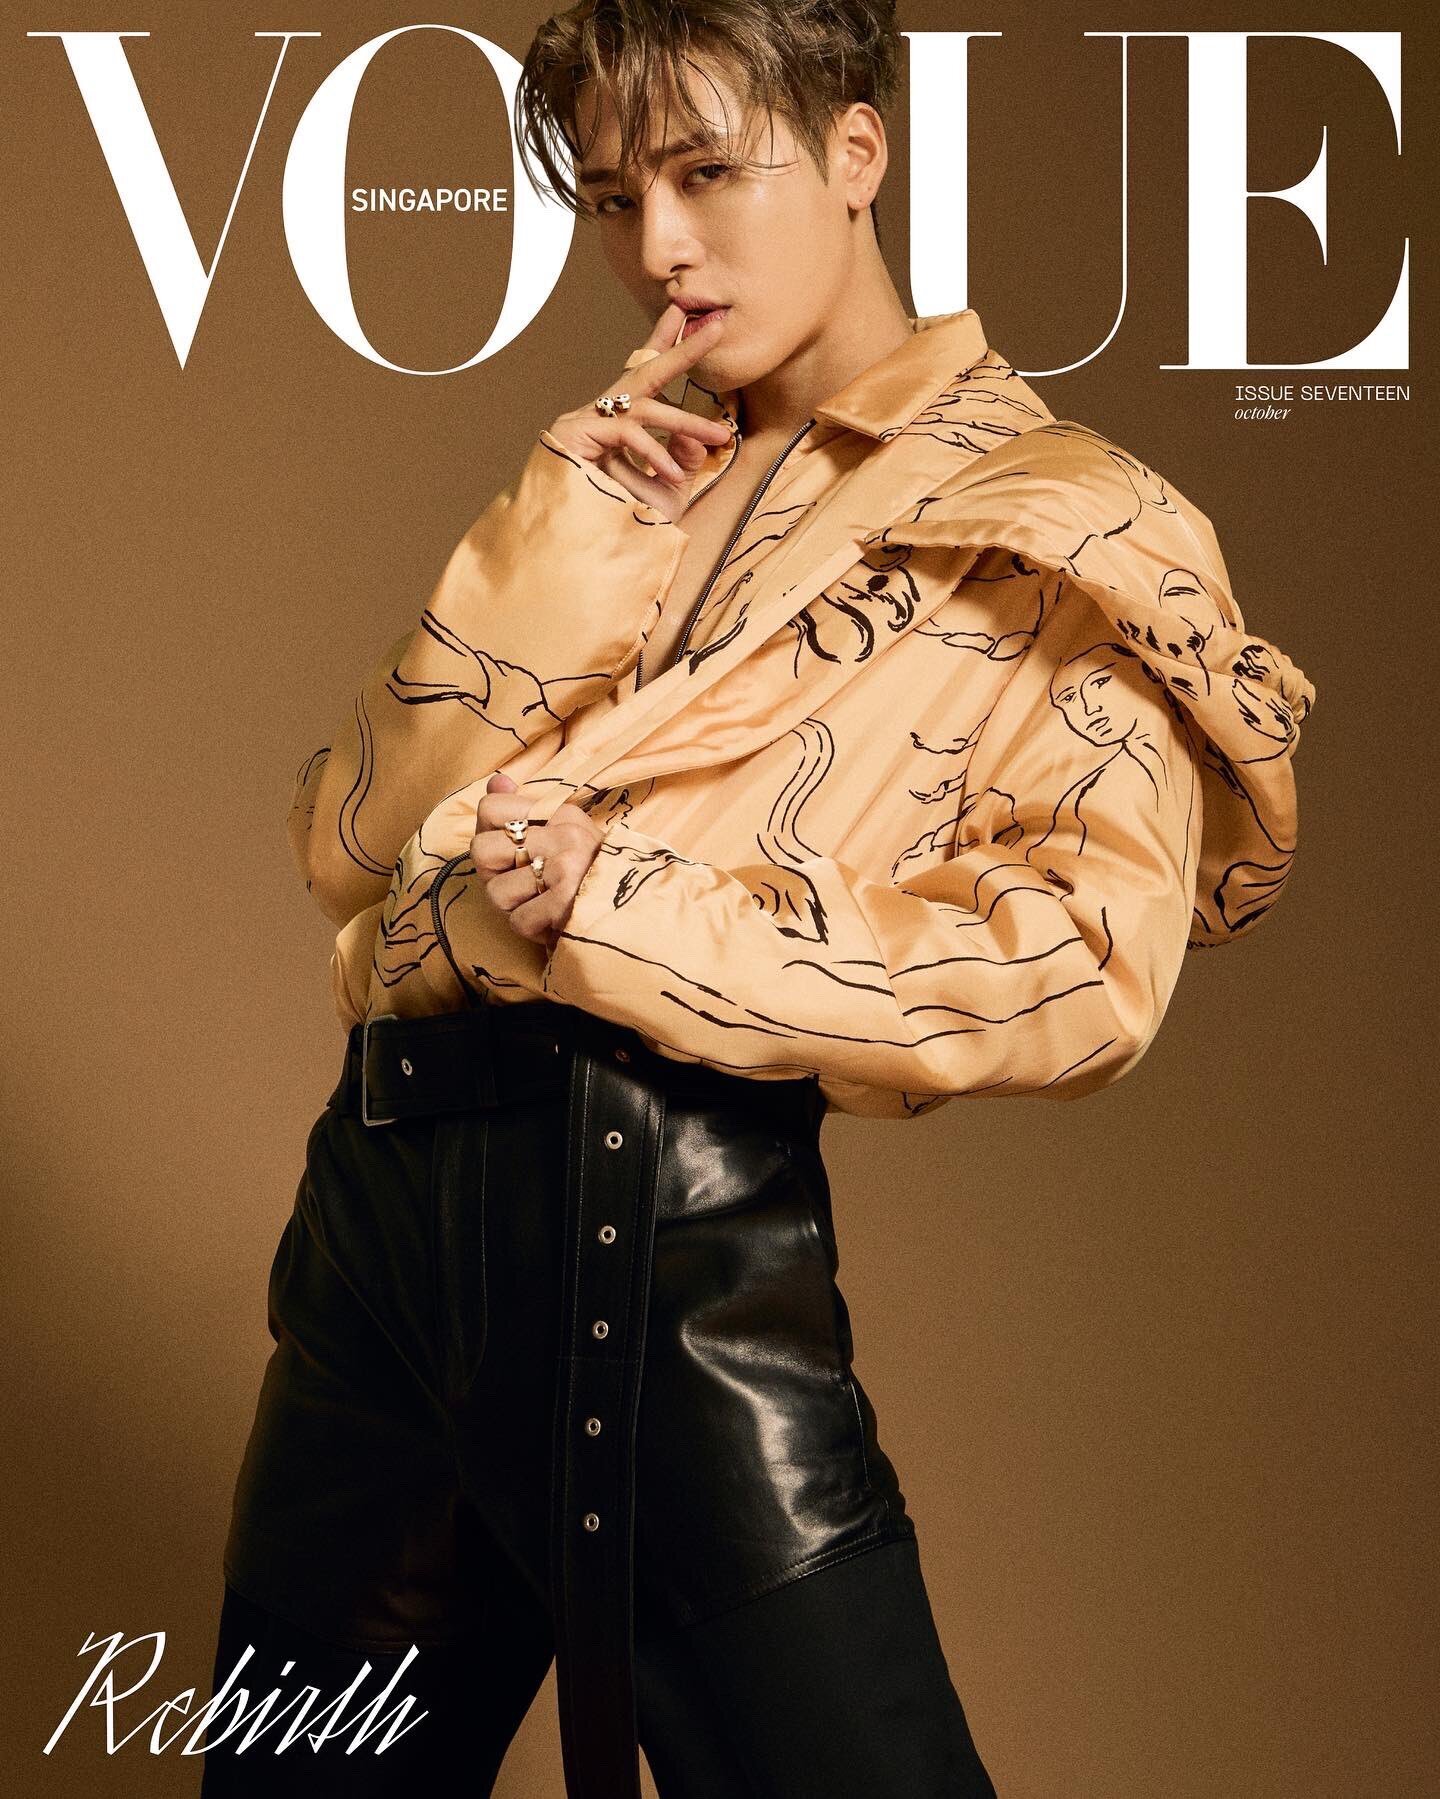 GOT7 JACKSON WANG for L'OFFICIEL Philippines Summer Issue 2022